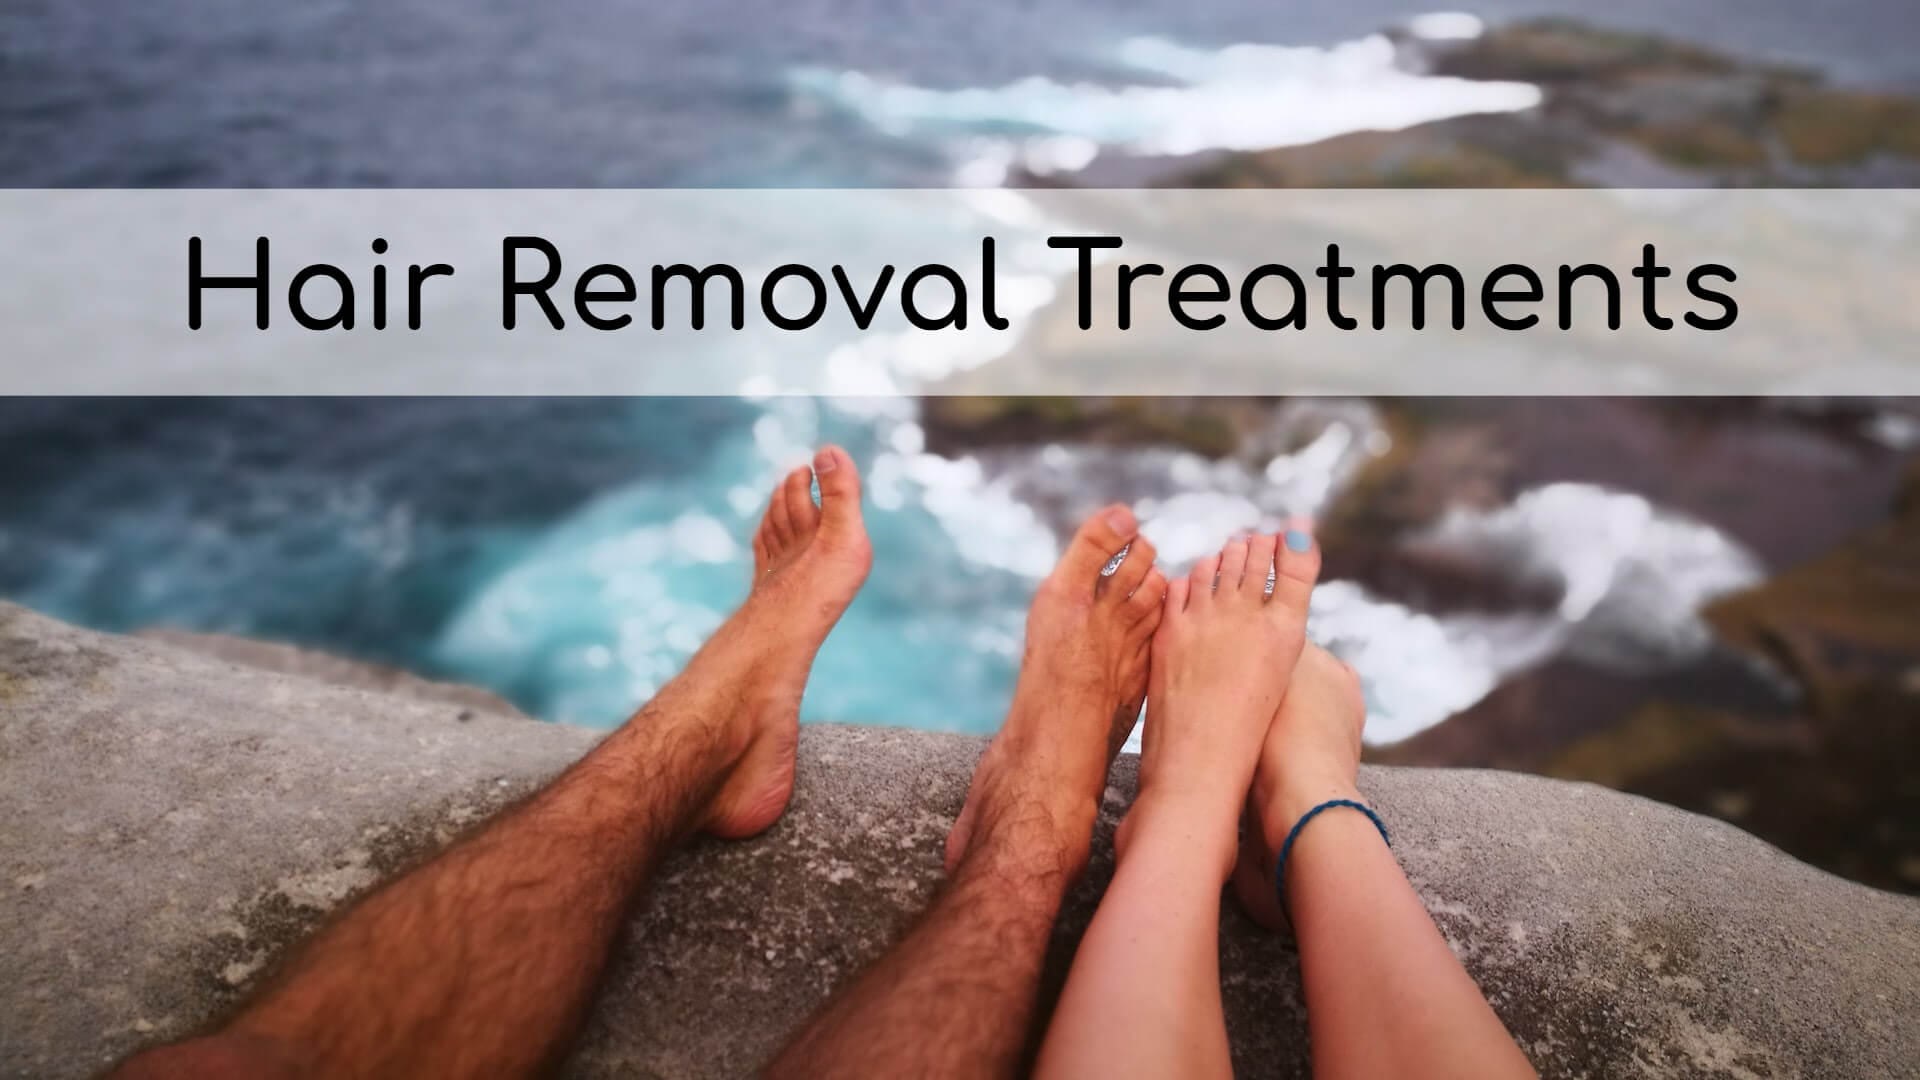 Hair Removal Treatments